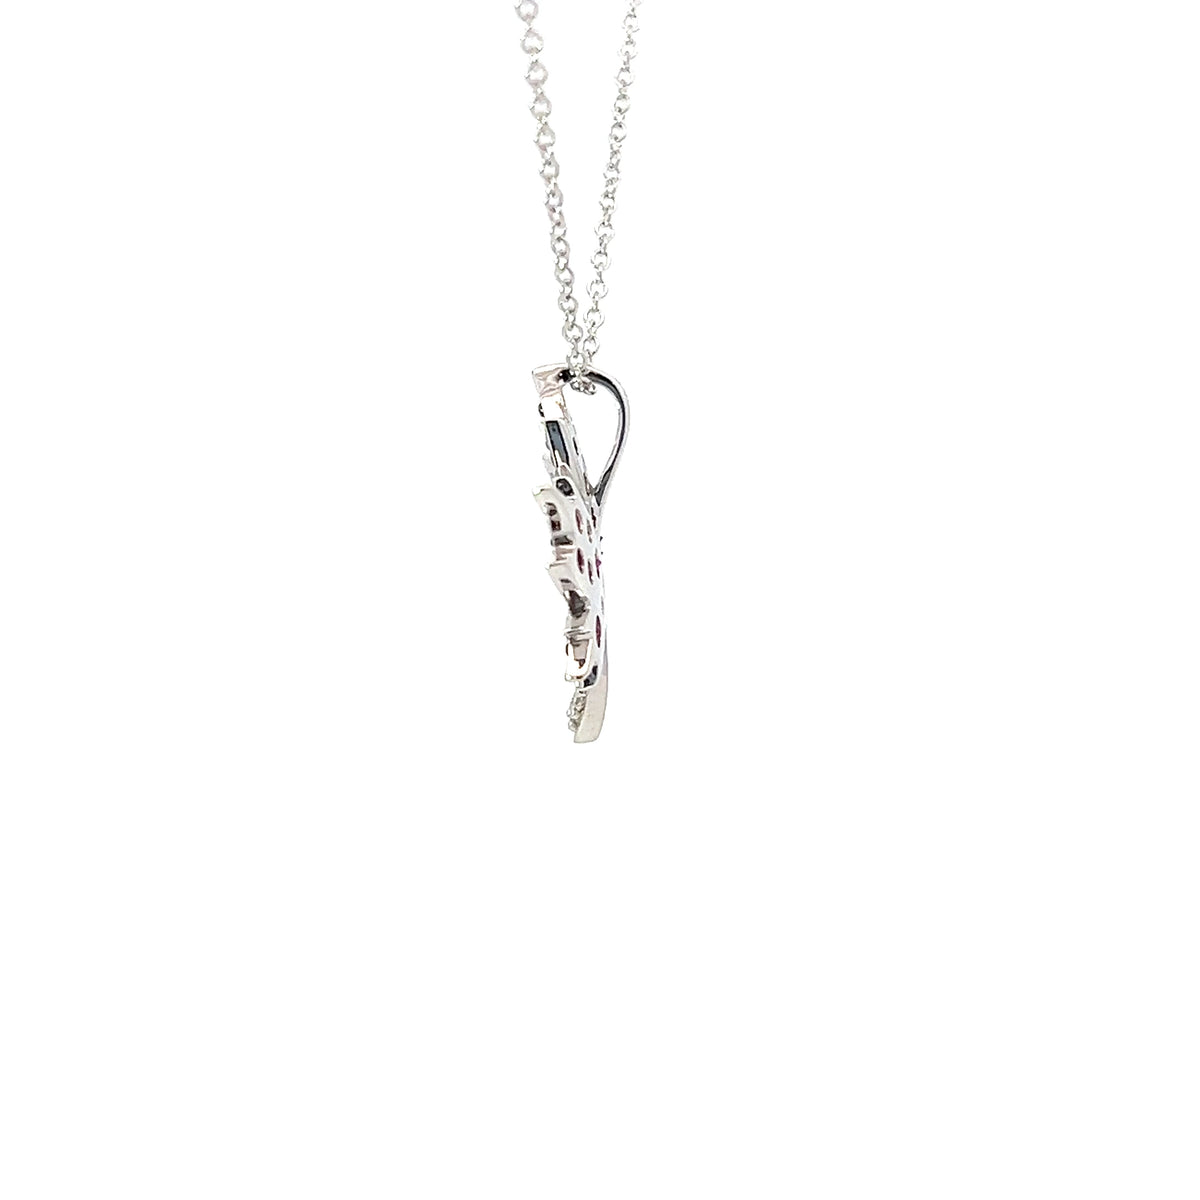 10K White Gold 0.45cttw Ruby and 0.015cttw Diamond Necklace with Cable Chain (Spring Clasp) - Adjustable 17 - 18 Inches